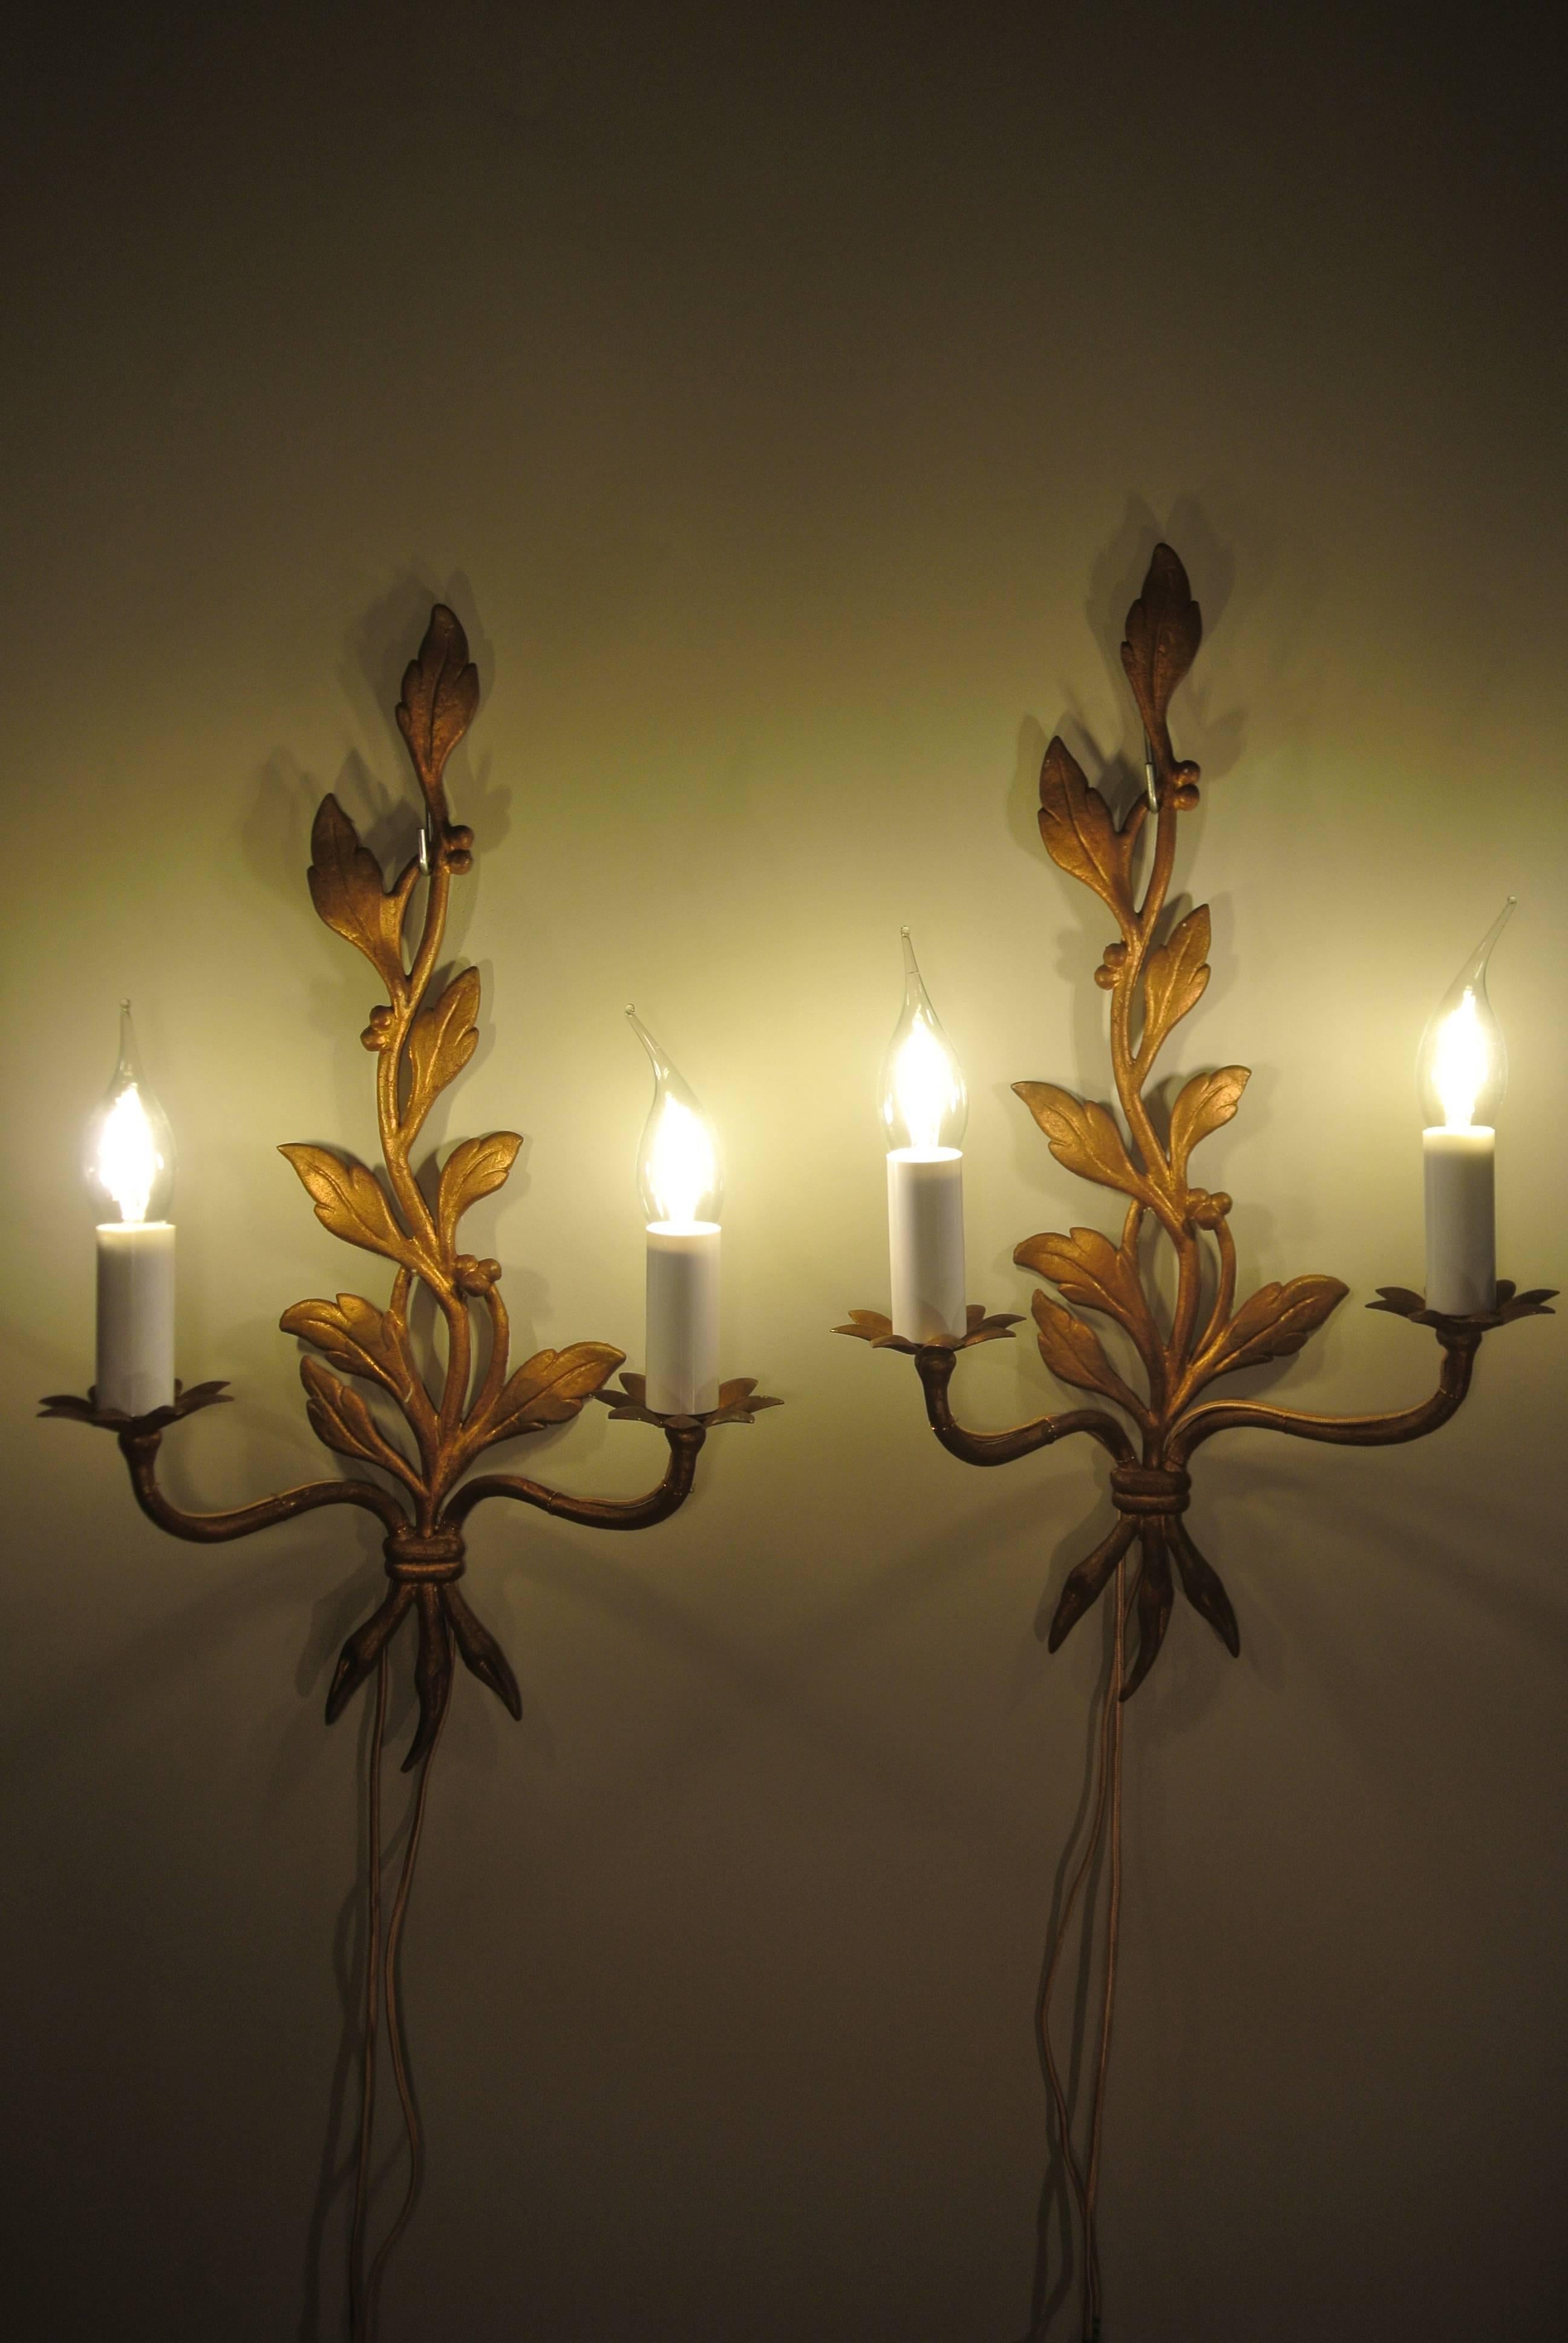 French Pair of Mid-Century Modern Gold Gilt Bronze Sconces in a Leaf Design, circa 1960 For Sale